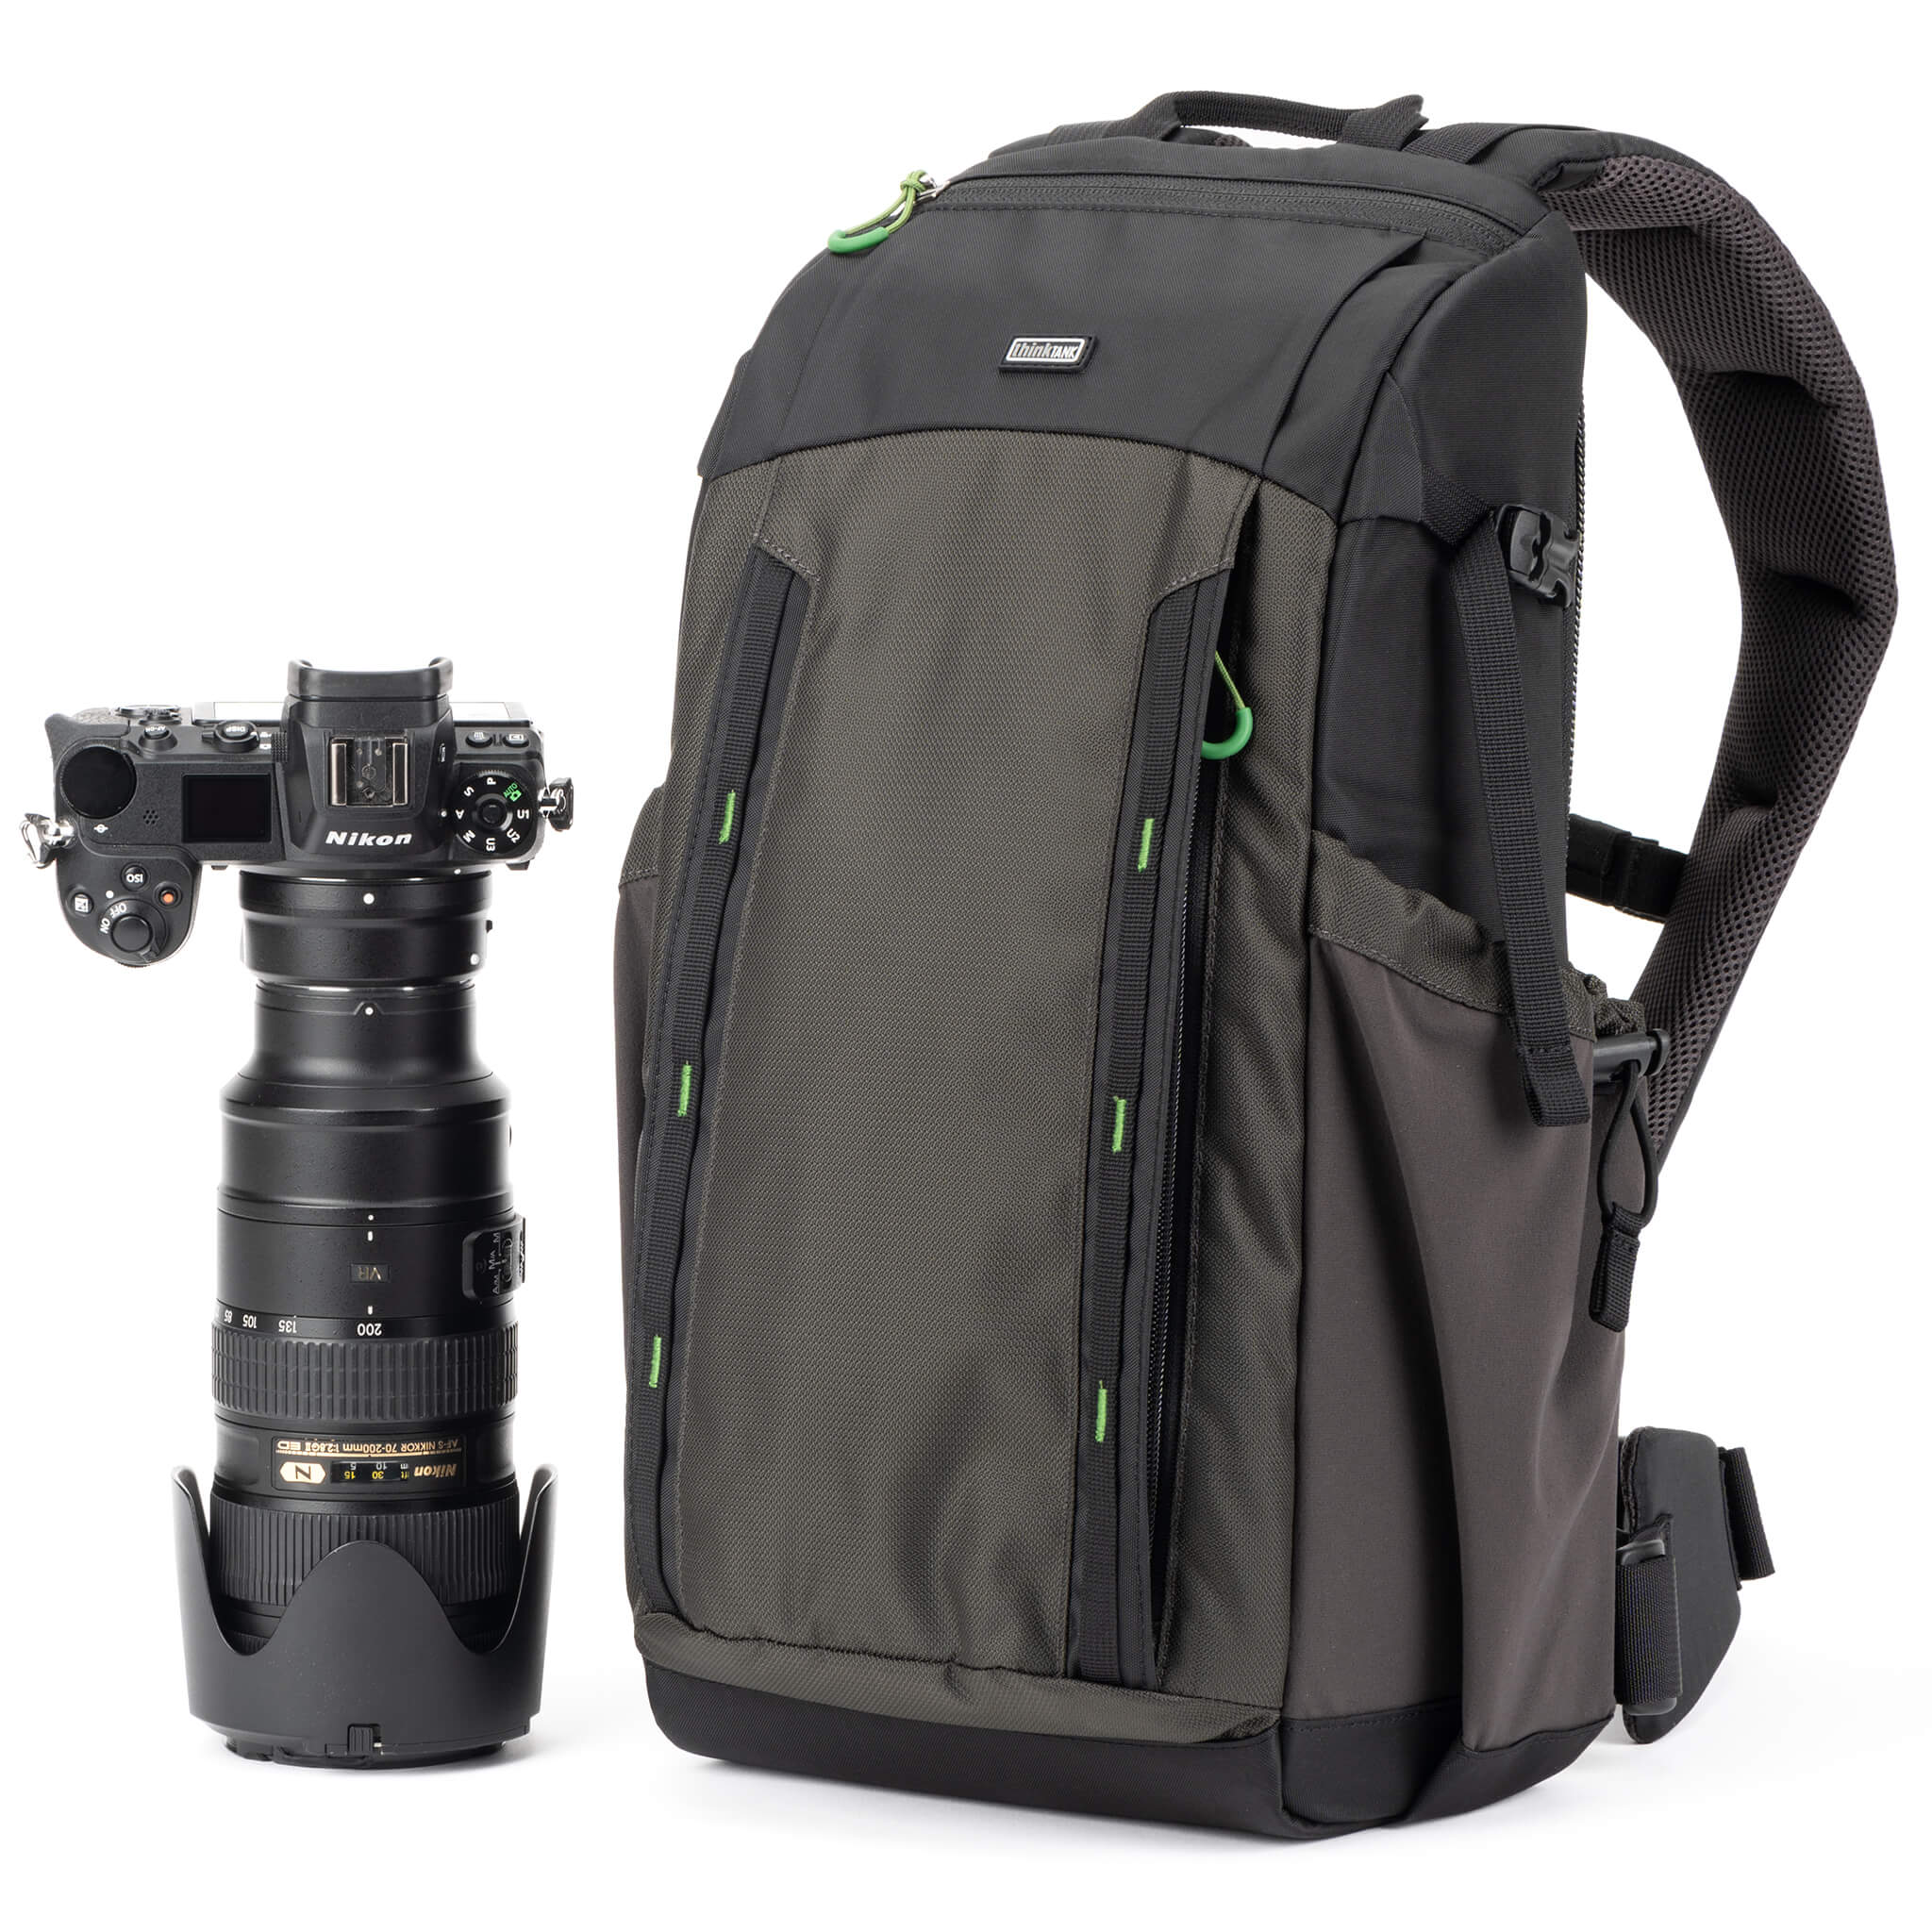 BackLight-Sprint-Charcoal  Slim, lightweight backpack for the minimalist photographer